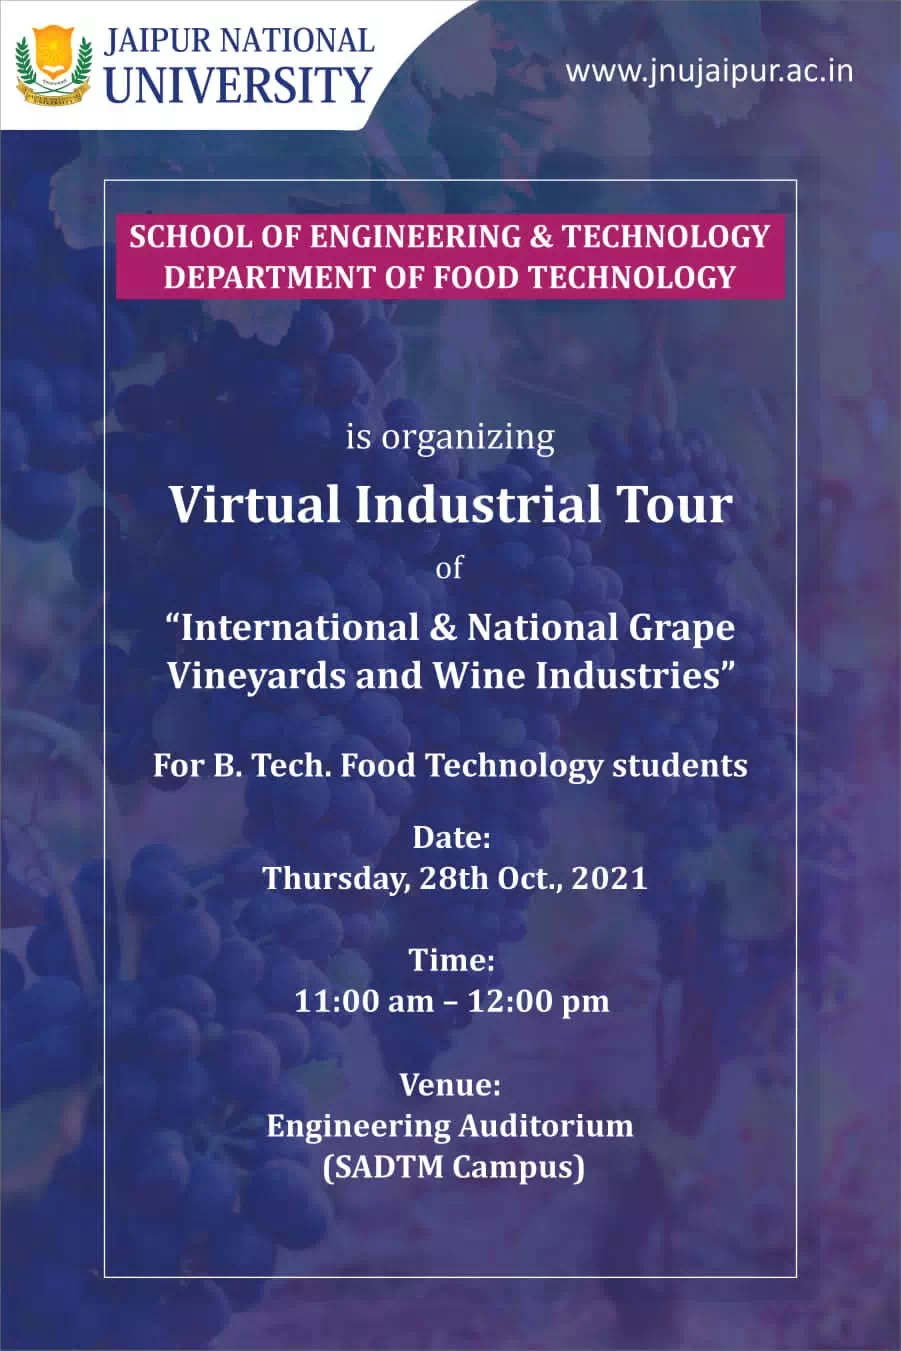 Virtual Industrial Tour of “International and National Grape Vineyards and Wine Industries” in Food Technology